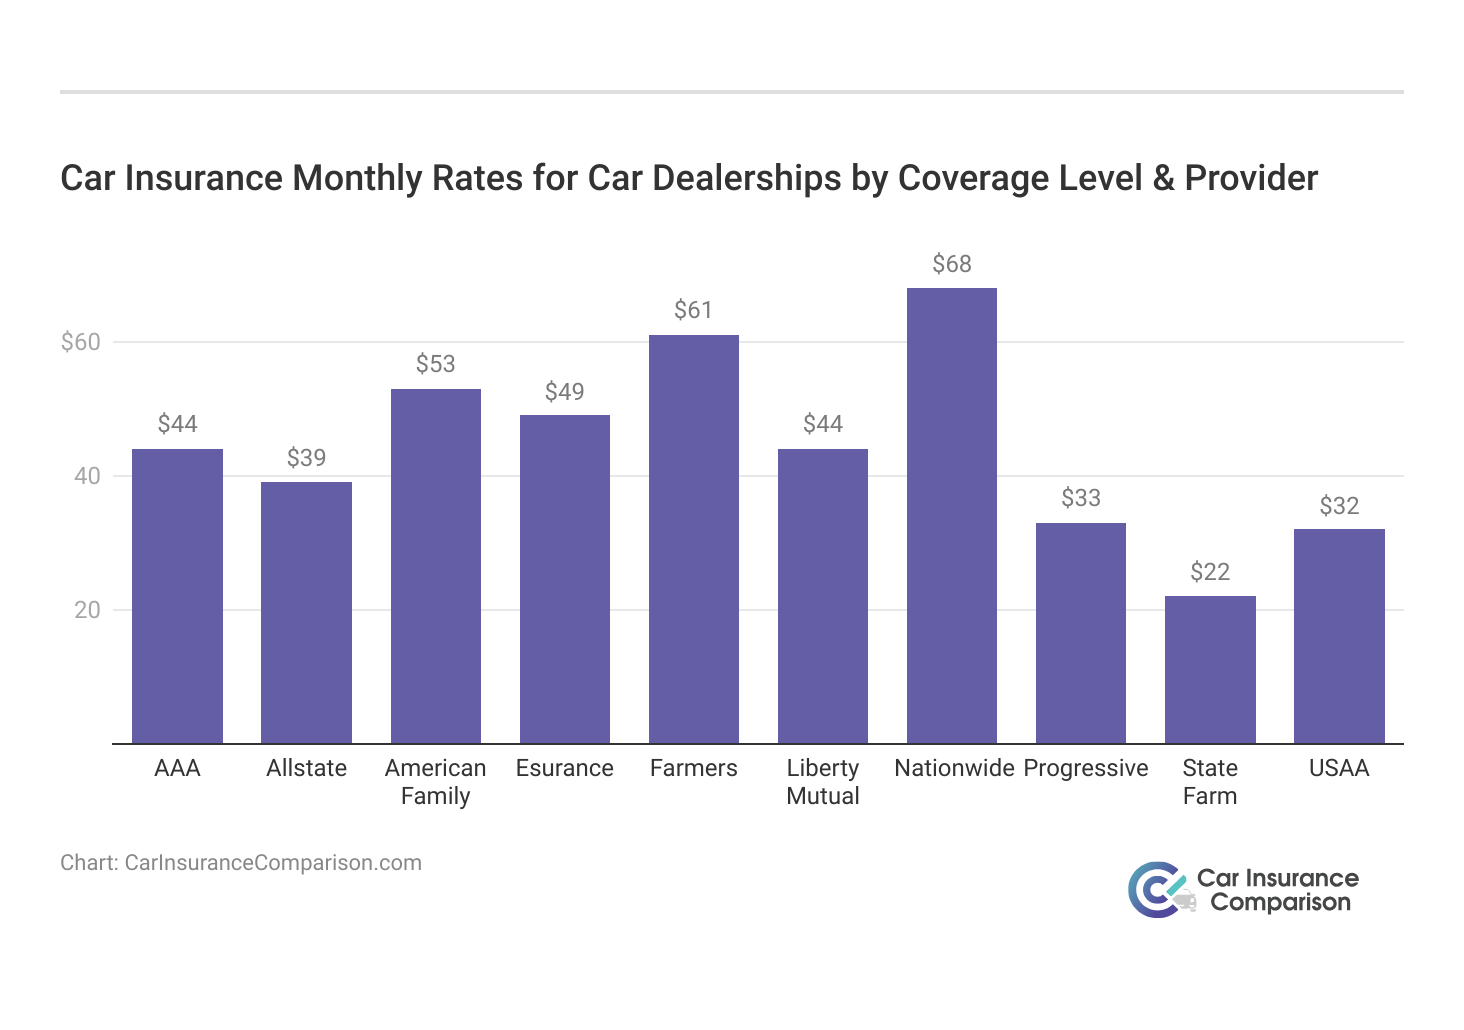 <h3>Car Insurance Monthly Rates for Car Dealerships by Coverage Level & Provider</h3>